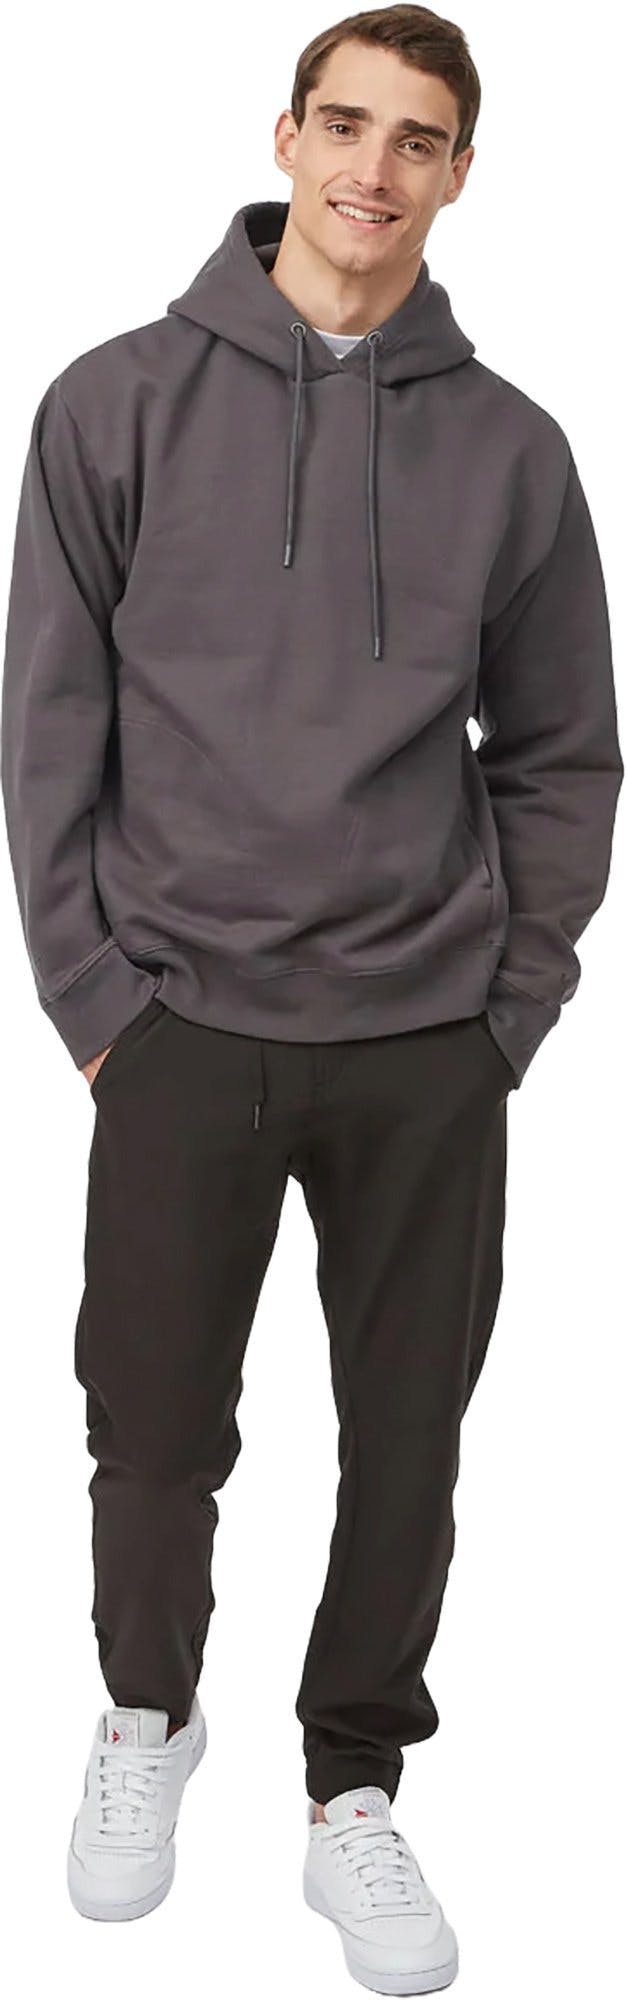 Product image for Recycled Cotton Hoodie - Men's